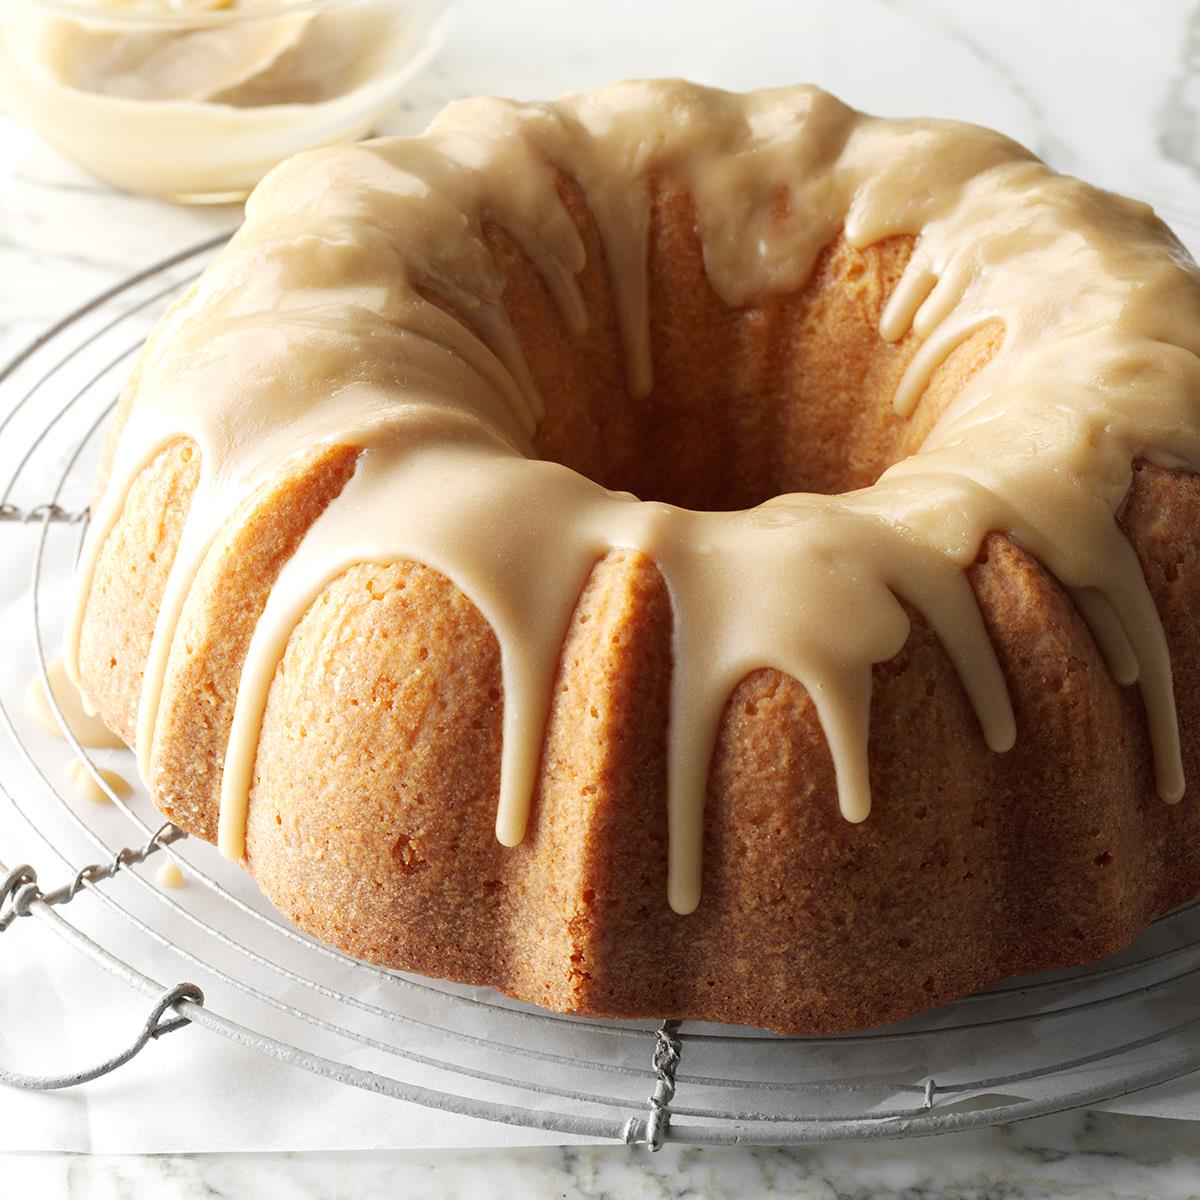 Buttermilk Cake With Caramel Icing EXPS CWFM17 38027 C10 11 2b 